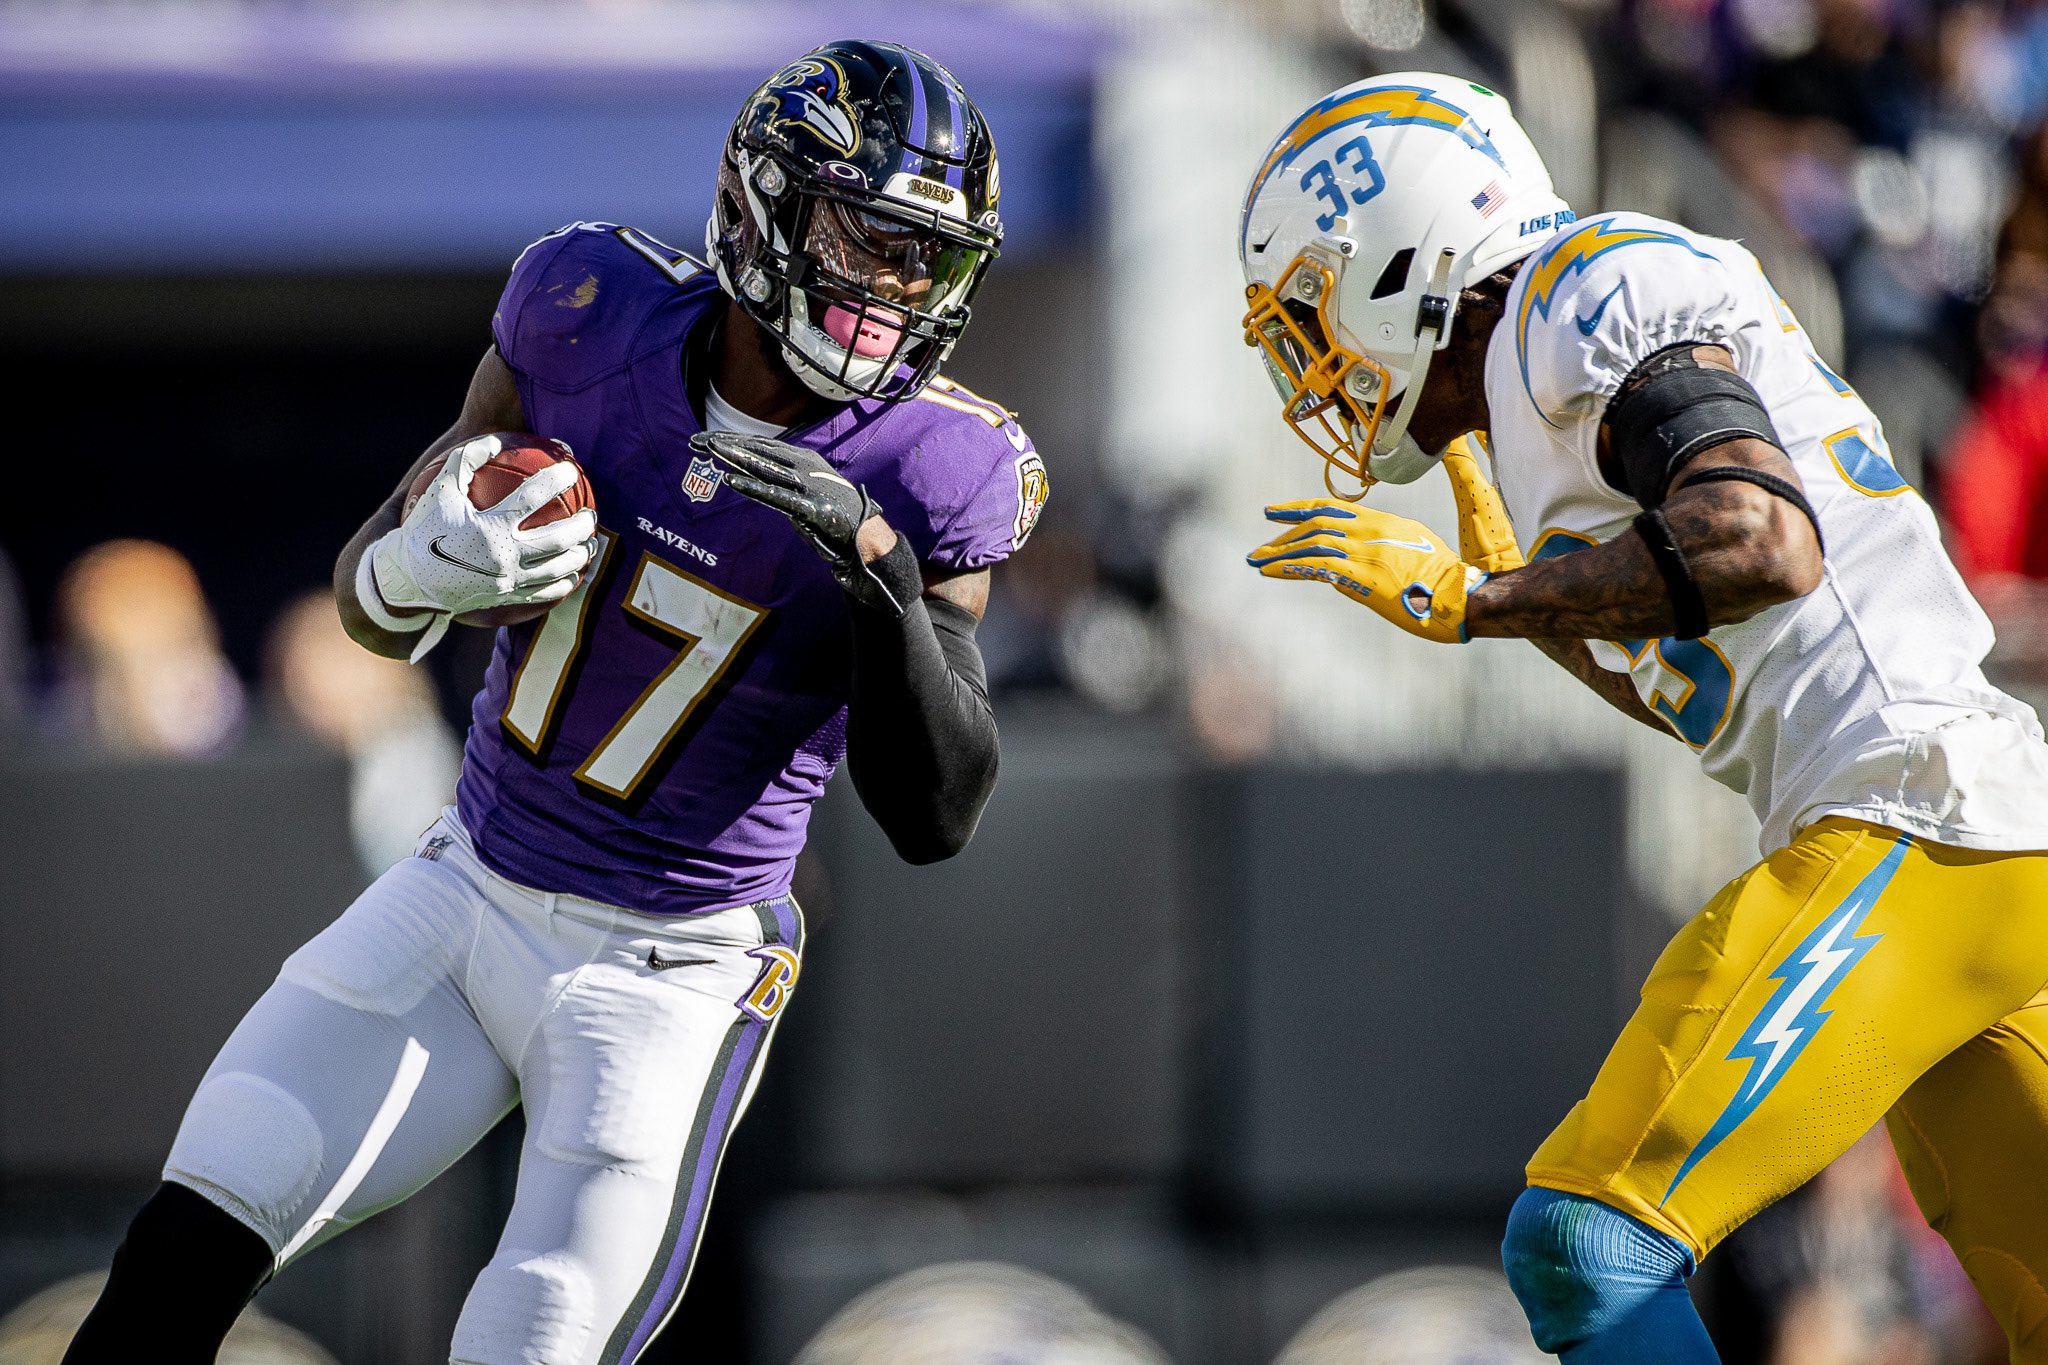 NFL: Le’Veon Bell’s 1-yard TD powers Ravens to victory against Vikings